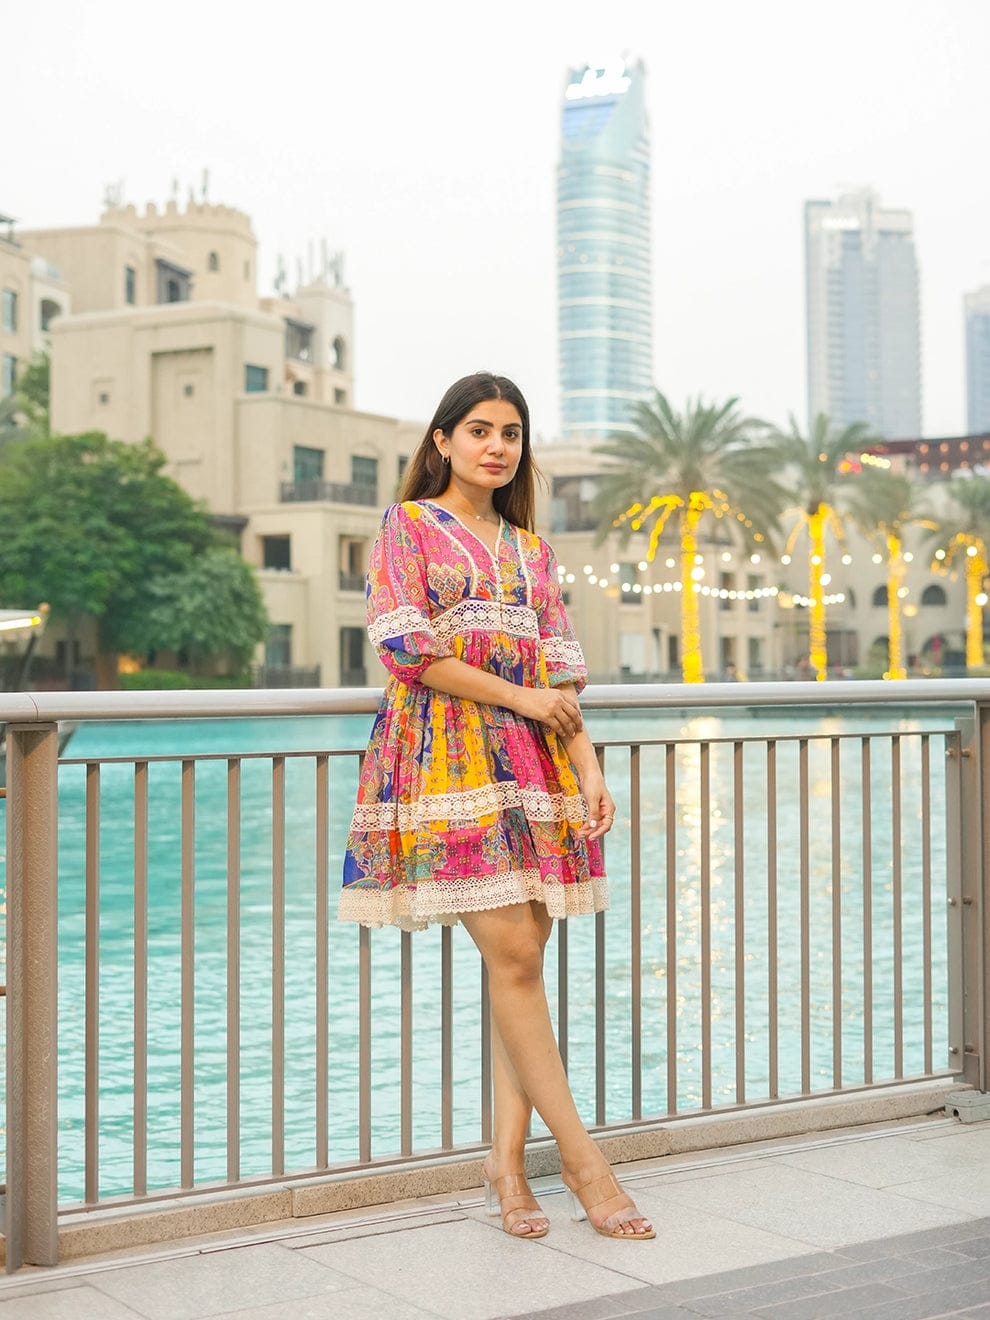 Chromatic Charm: Short Dress with Multicolored Lining